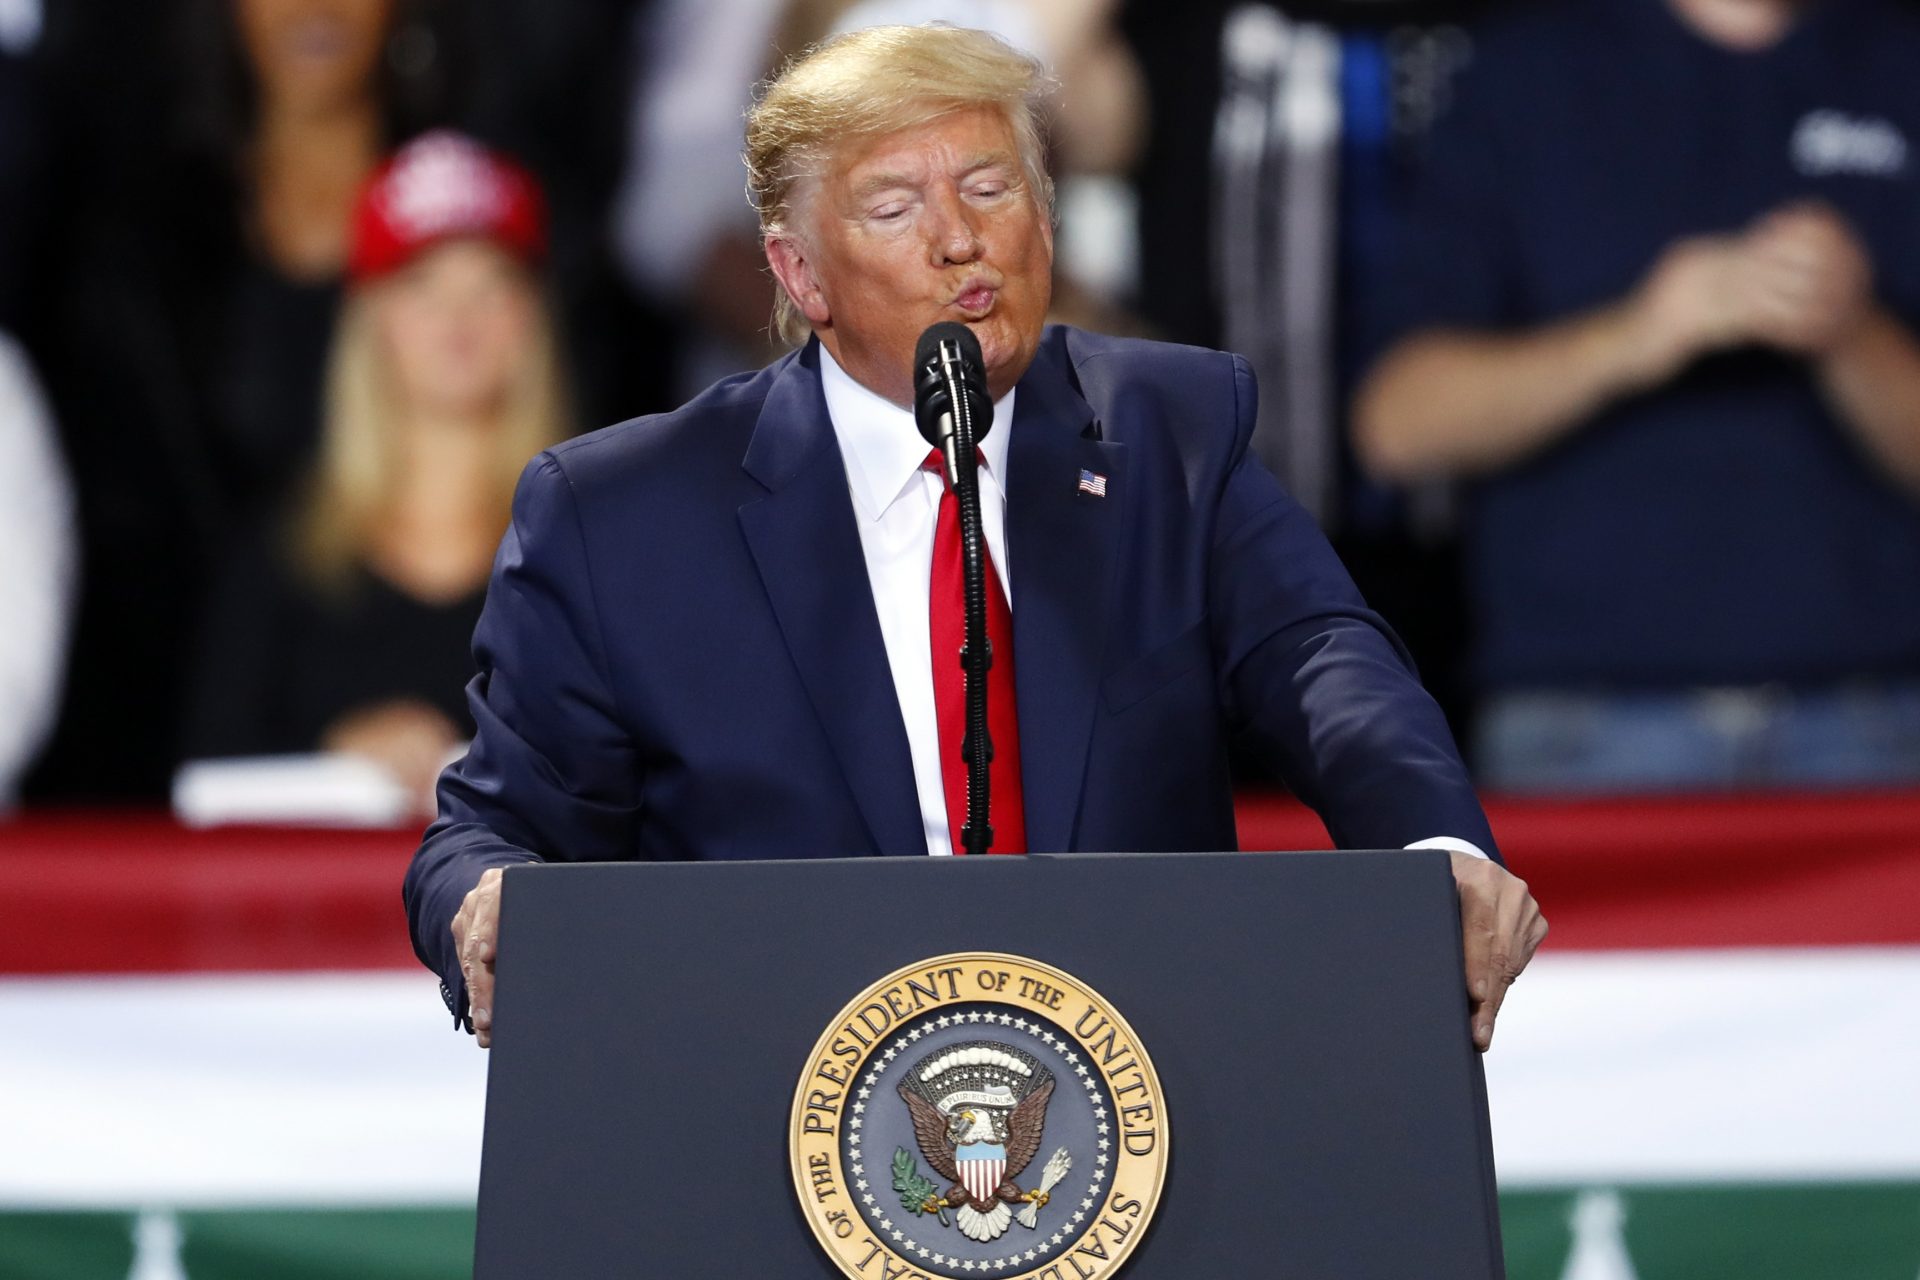 President Donald Trump speaks at a campaign rally in Battle Creek, Mich., Wednesday, Dec. 18, 2019.